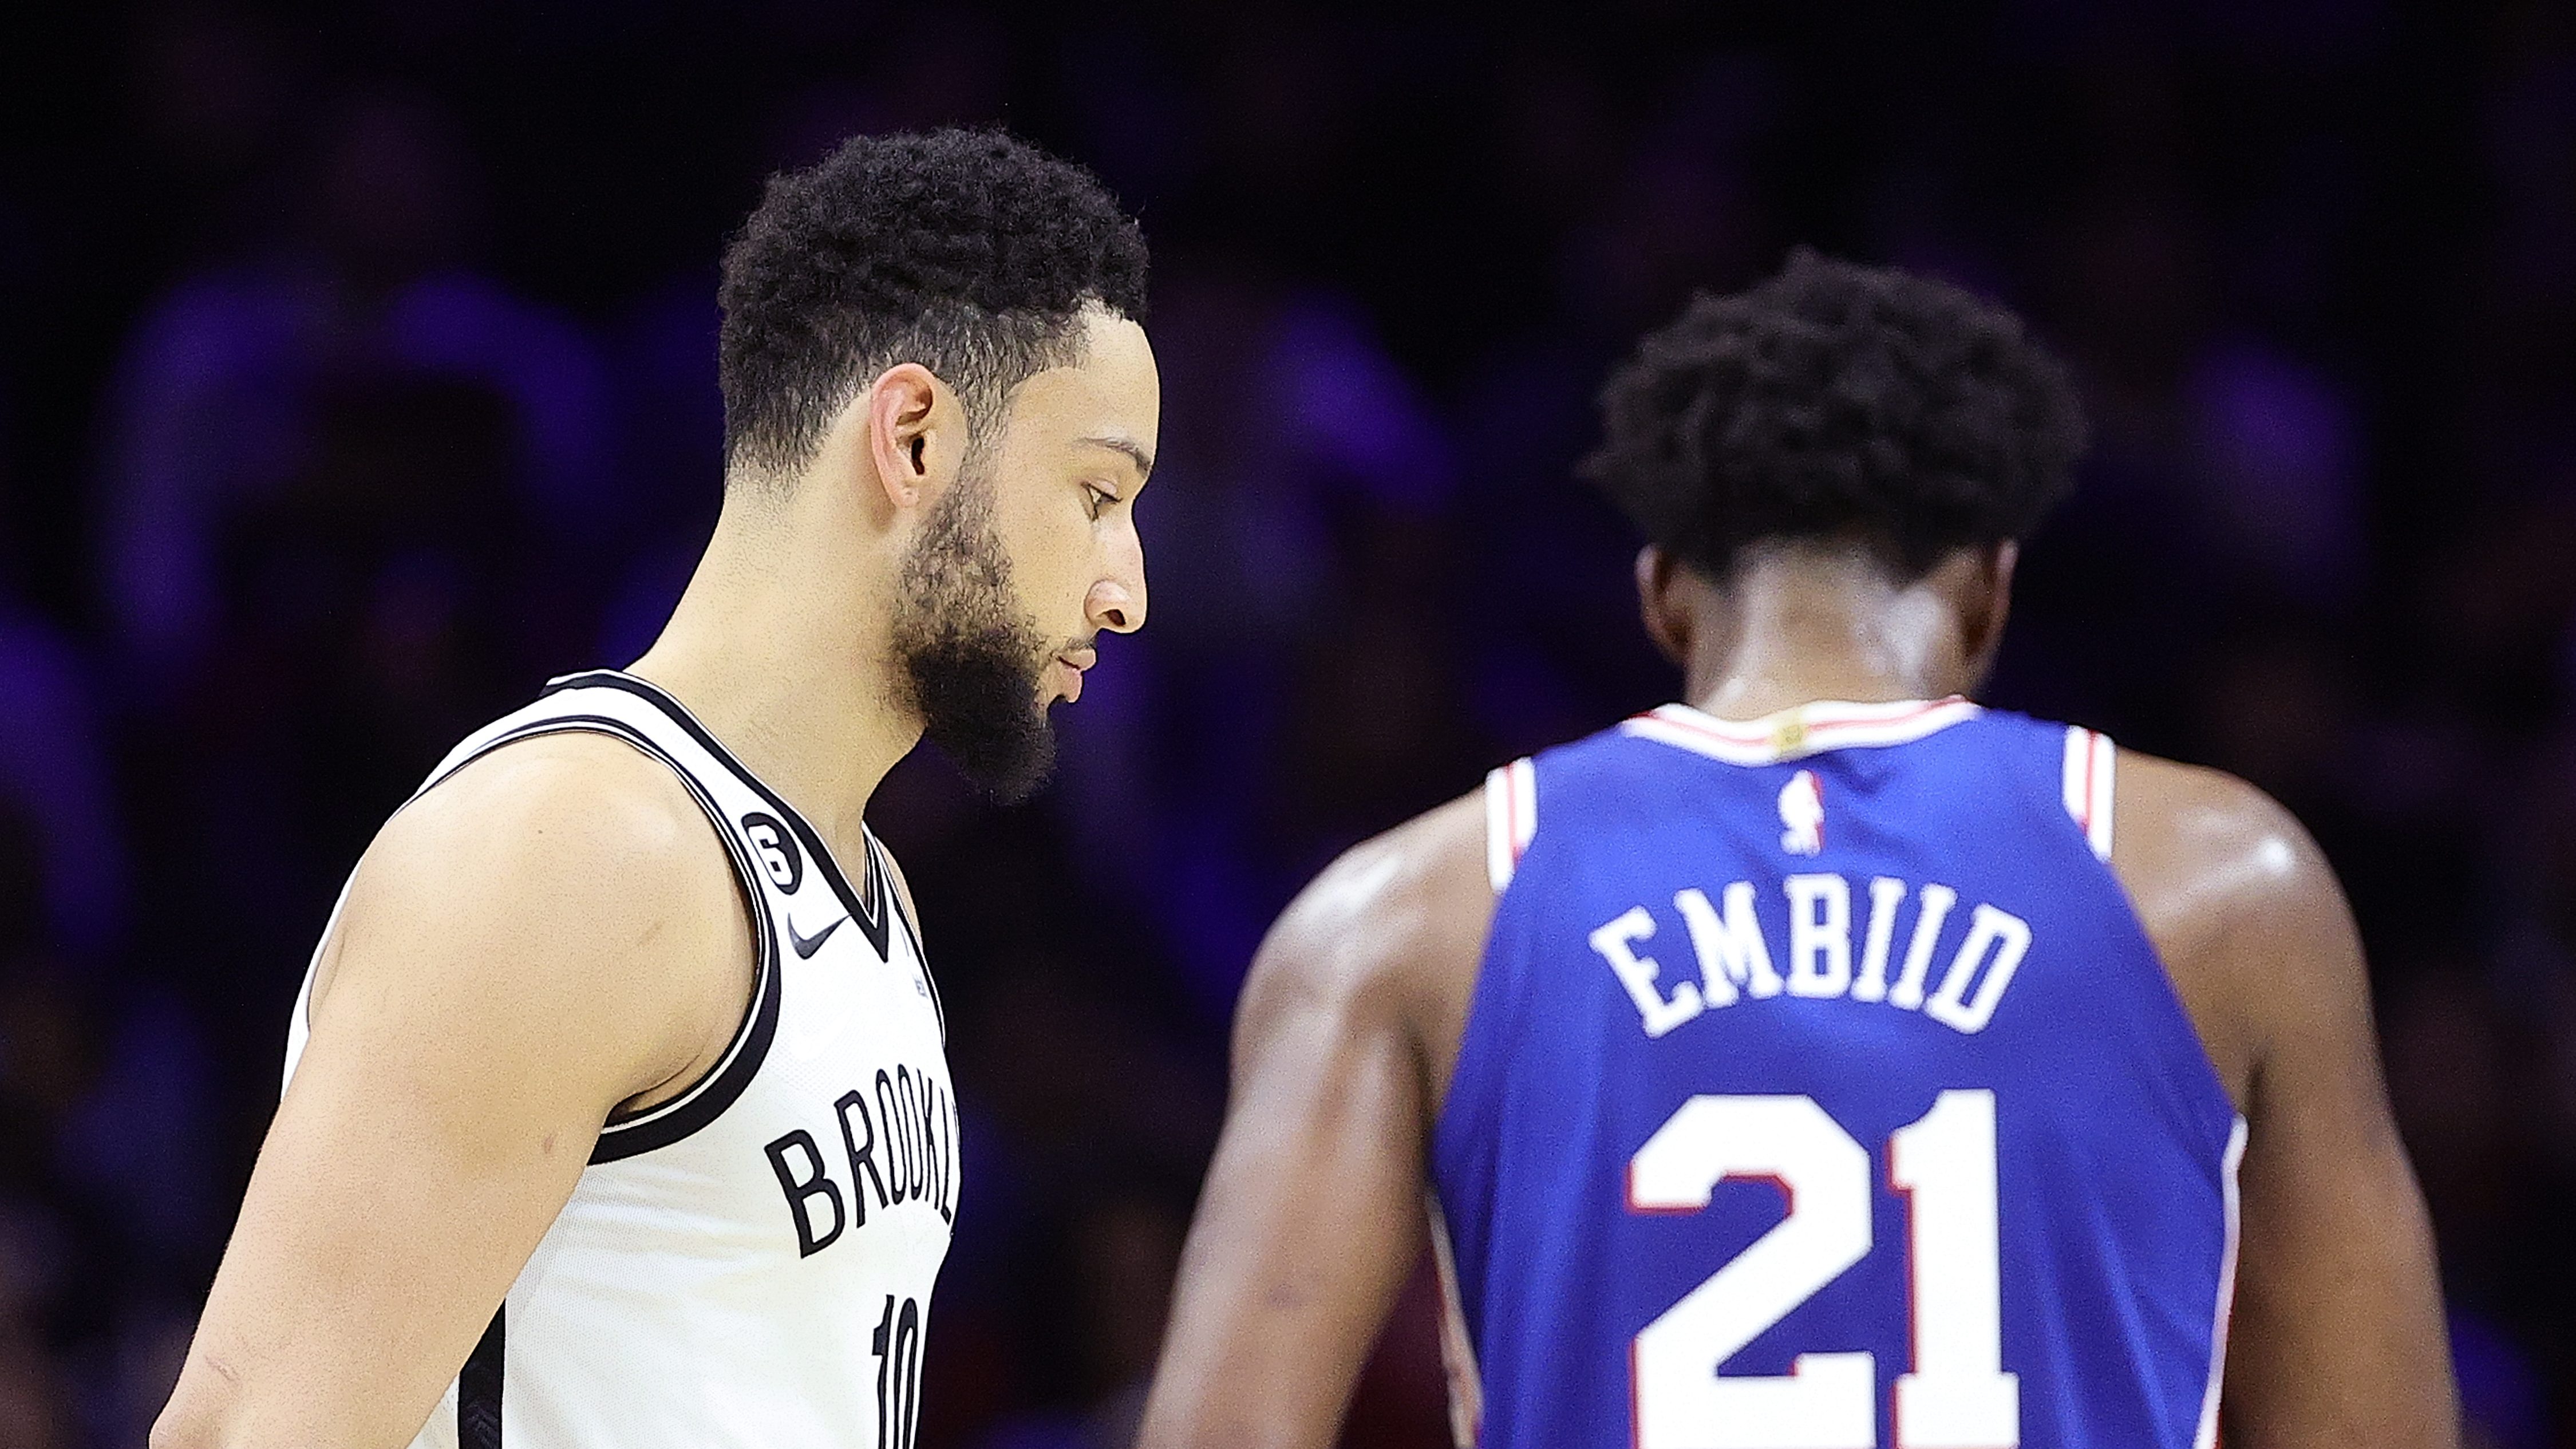 Whistle on X: BEN SIMMONS HAS BEEN TRADED TO THE NETS THERE'S A